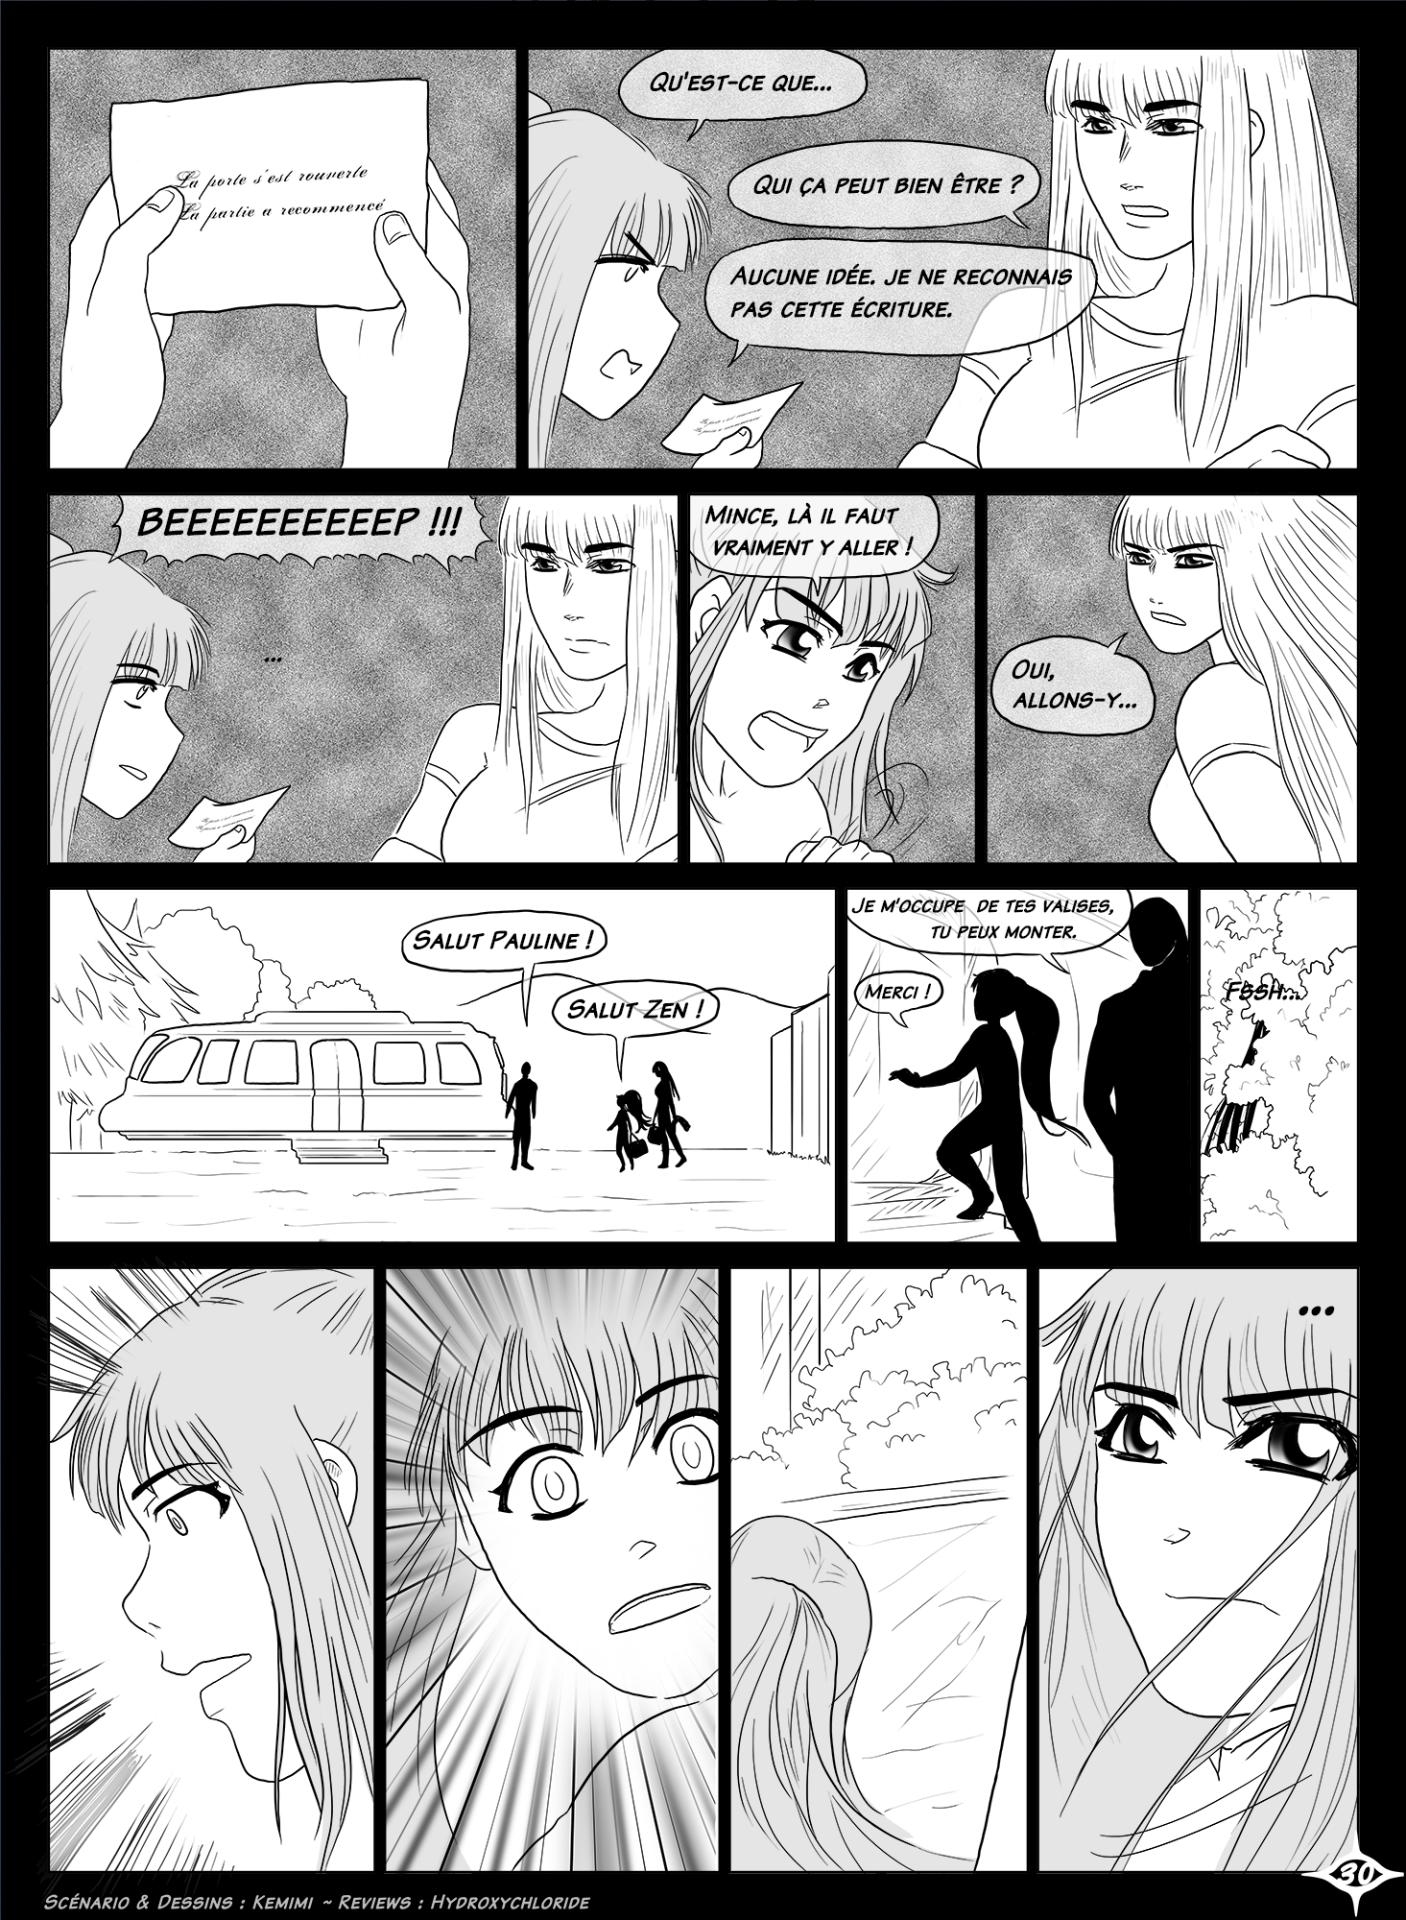 Chapitre 1 page 10 remake hors tempo coherence site